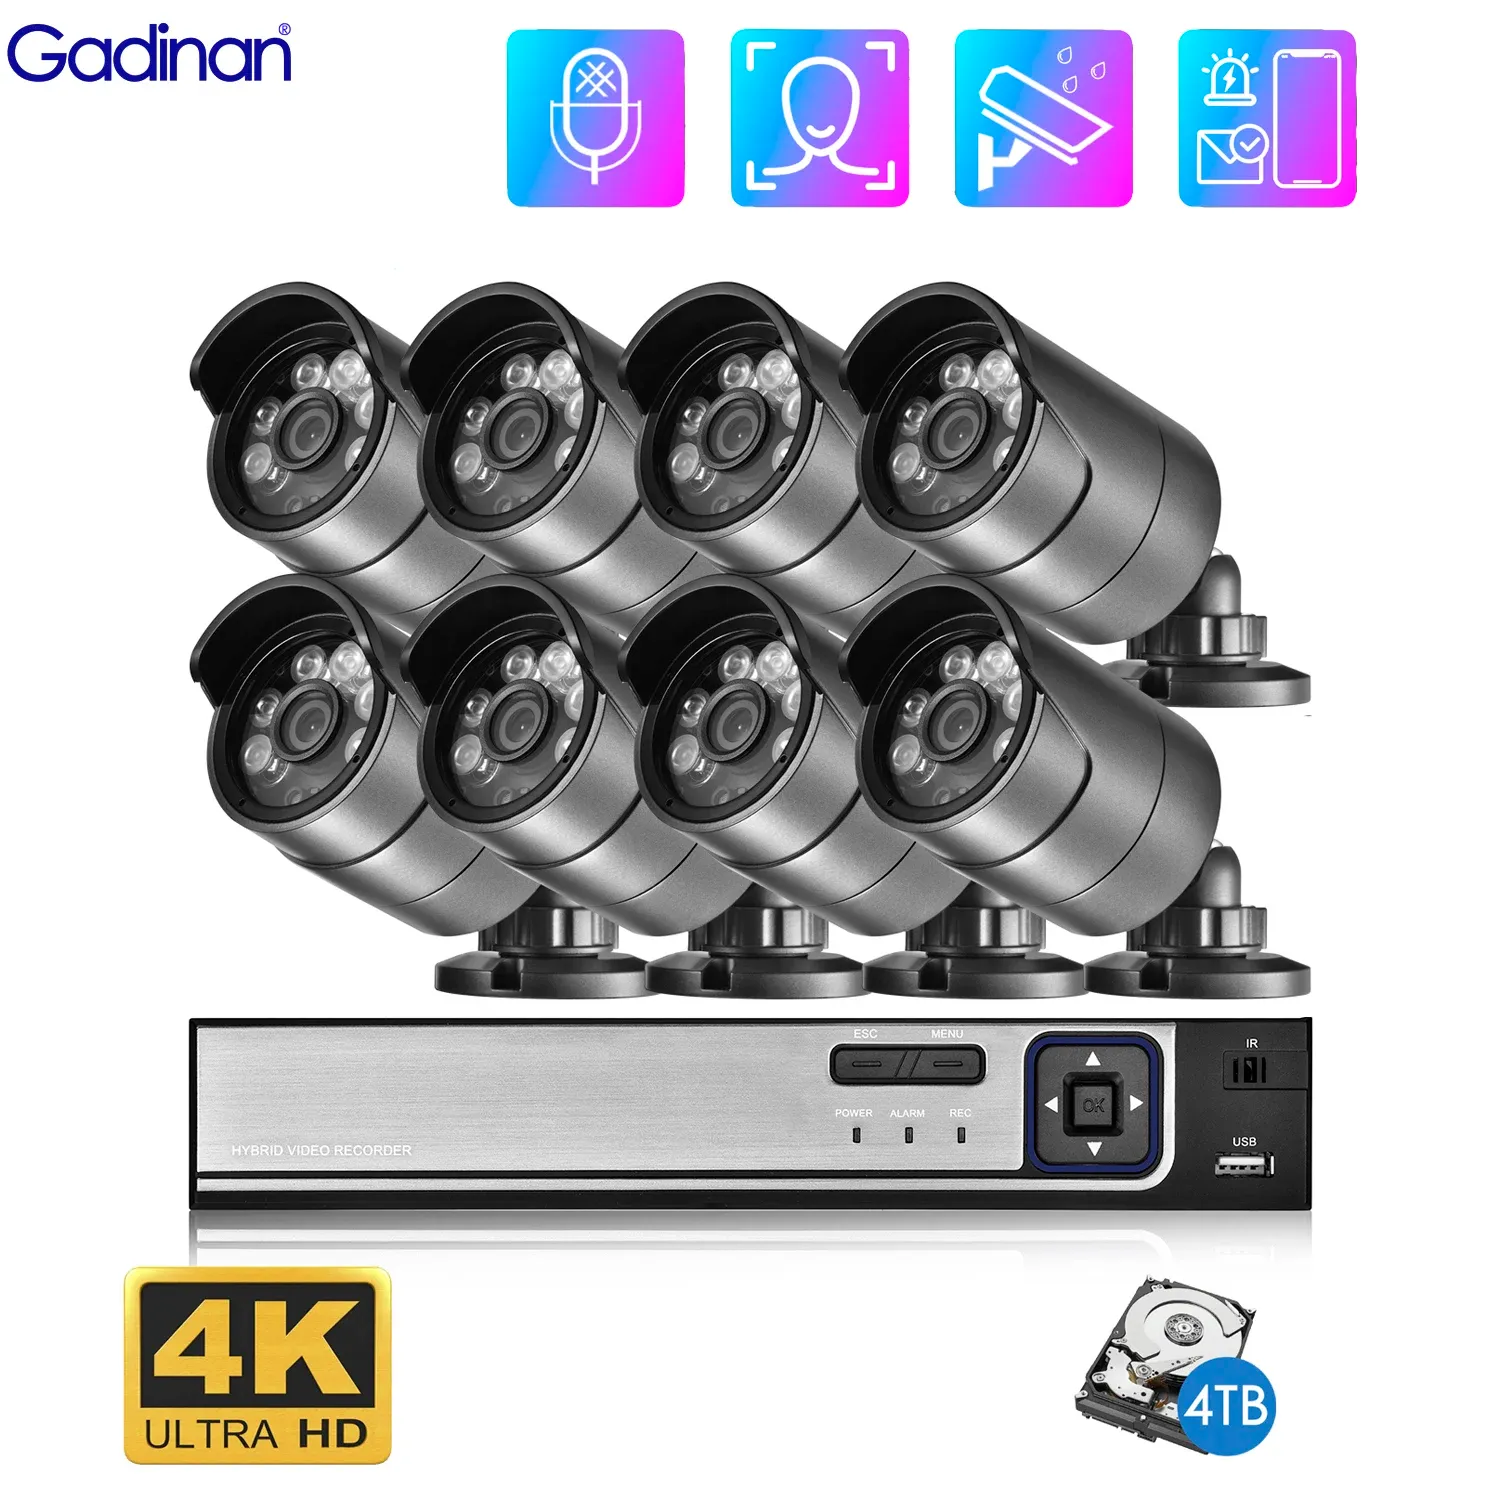 System Gadinan Ultra HD 4K 8CH POE IP Camera Security System Face Detection 5MP NVR Kit 8MP Outdoor Color Night CCTV Video Surveillance